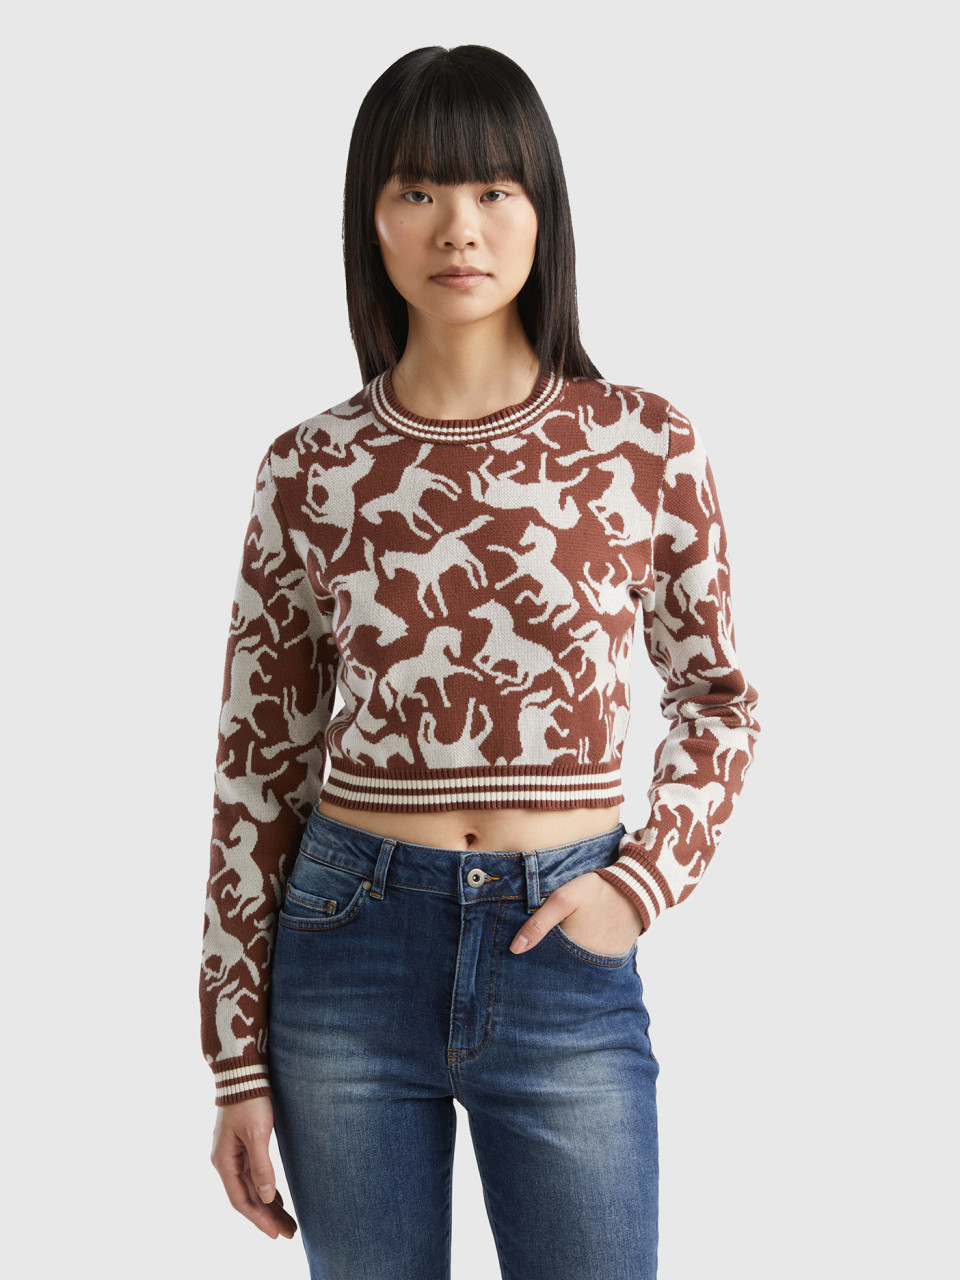 Benetton, Cropped Sweater With Horses, Brown, Women